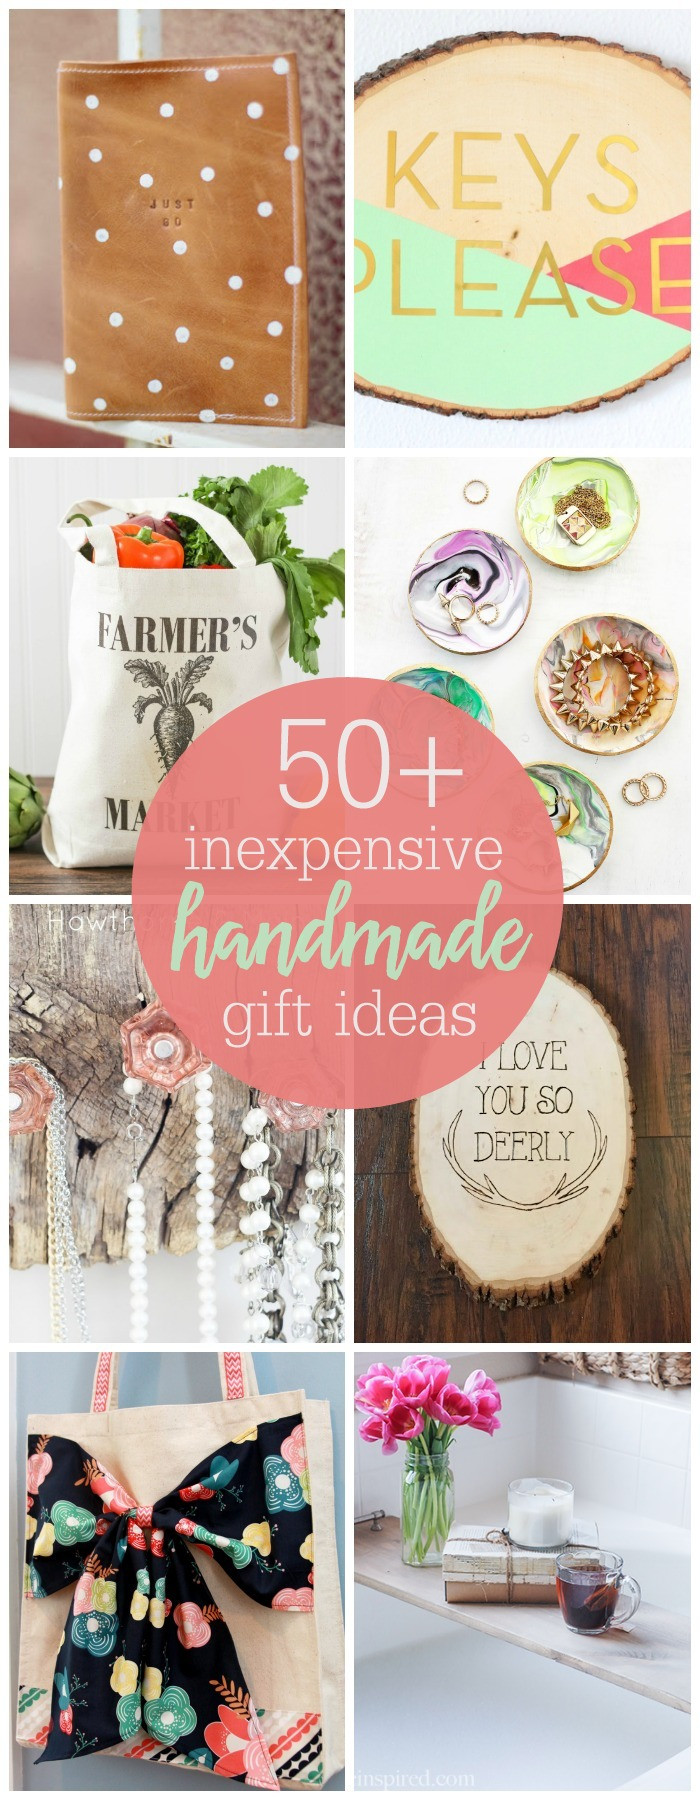 DIY Christmas Gifts For Friends
 Inexpensive Handmade Gift Ideas